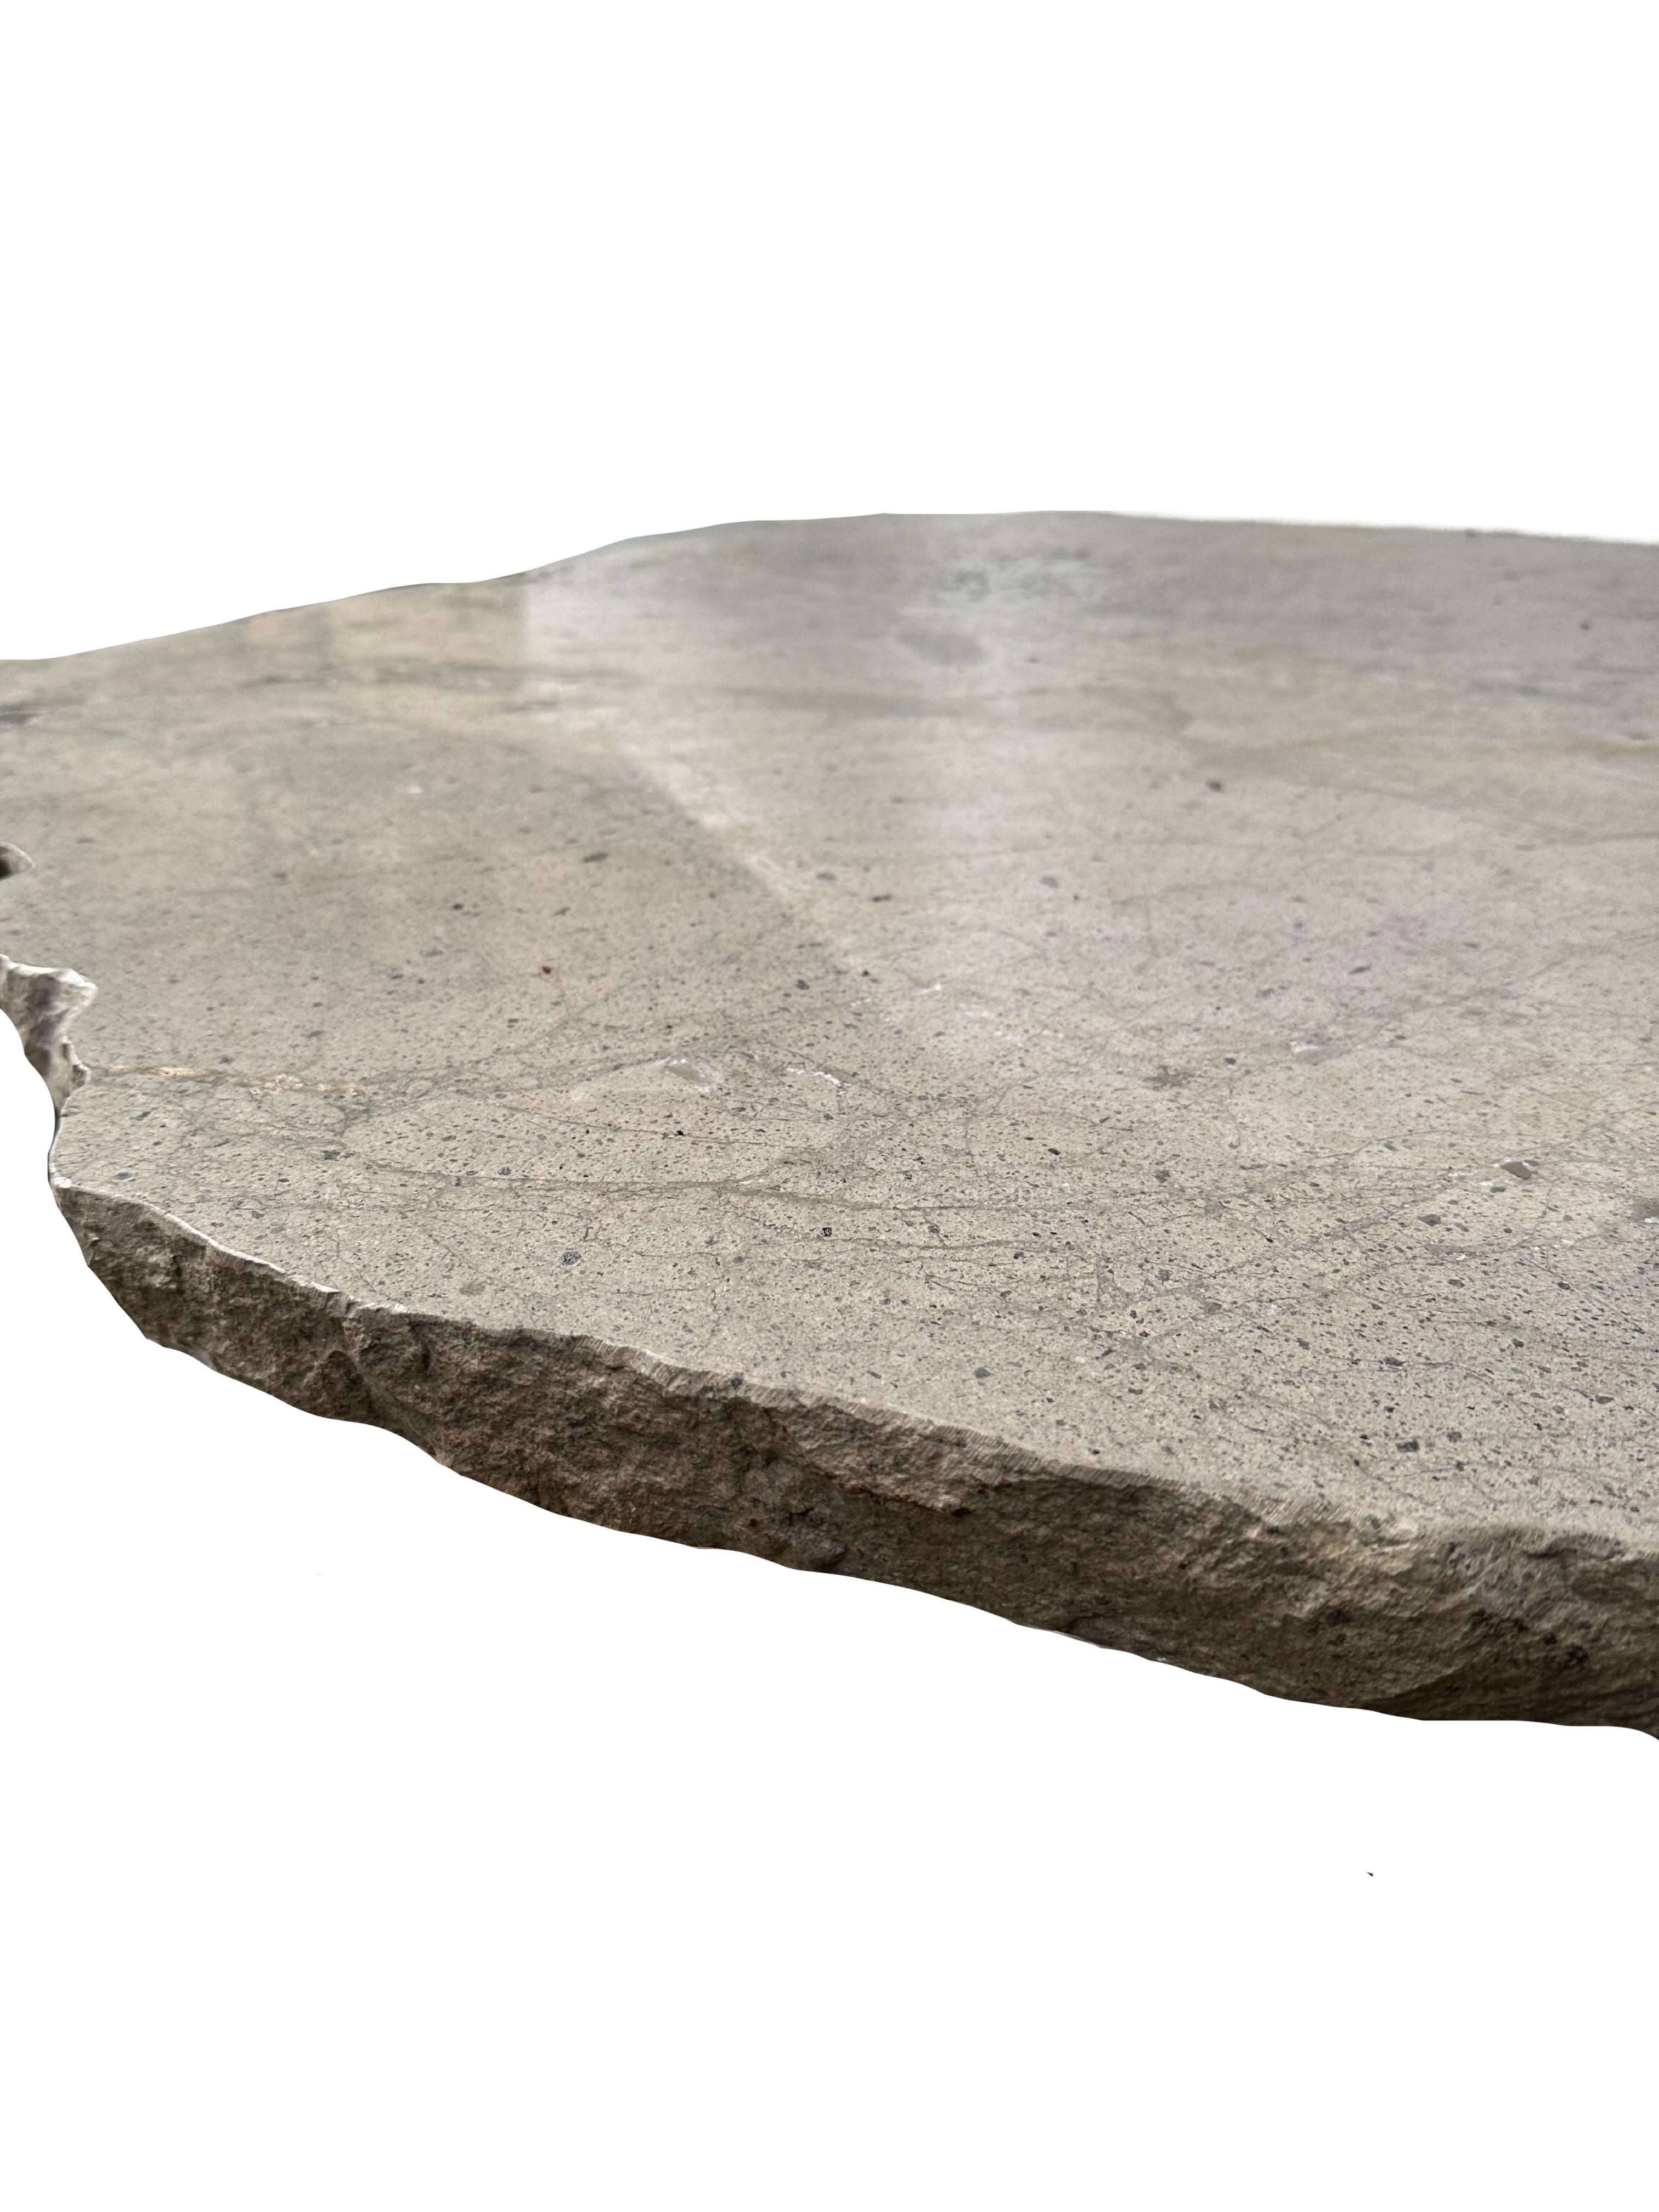 Indonesian Solid Sculptural River Stone Table from Java, Indonesia, Modern Organic